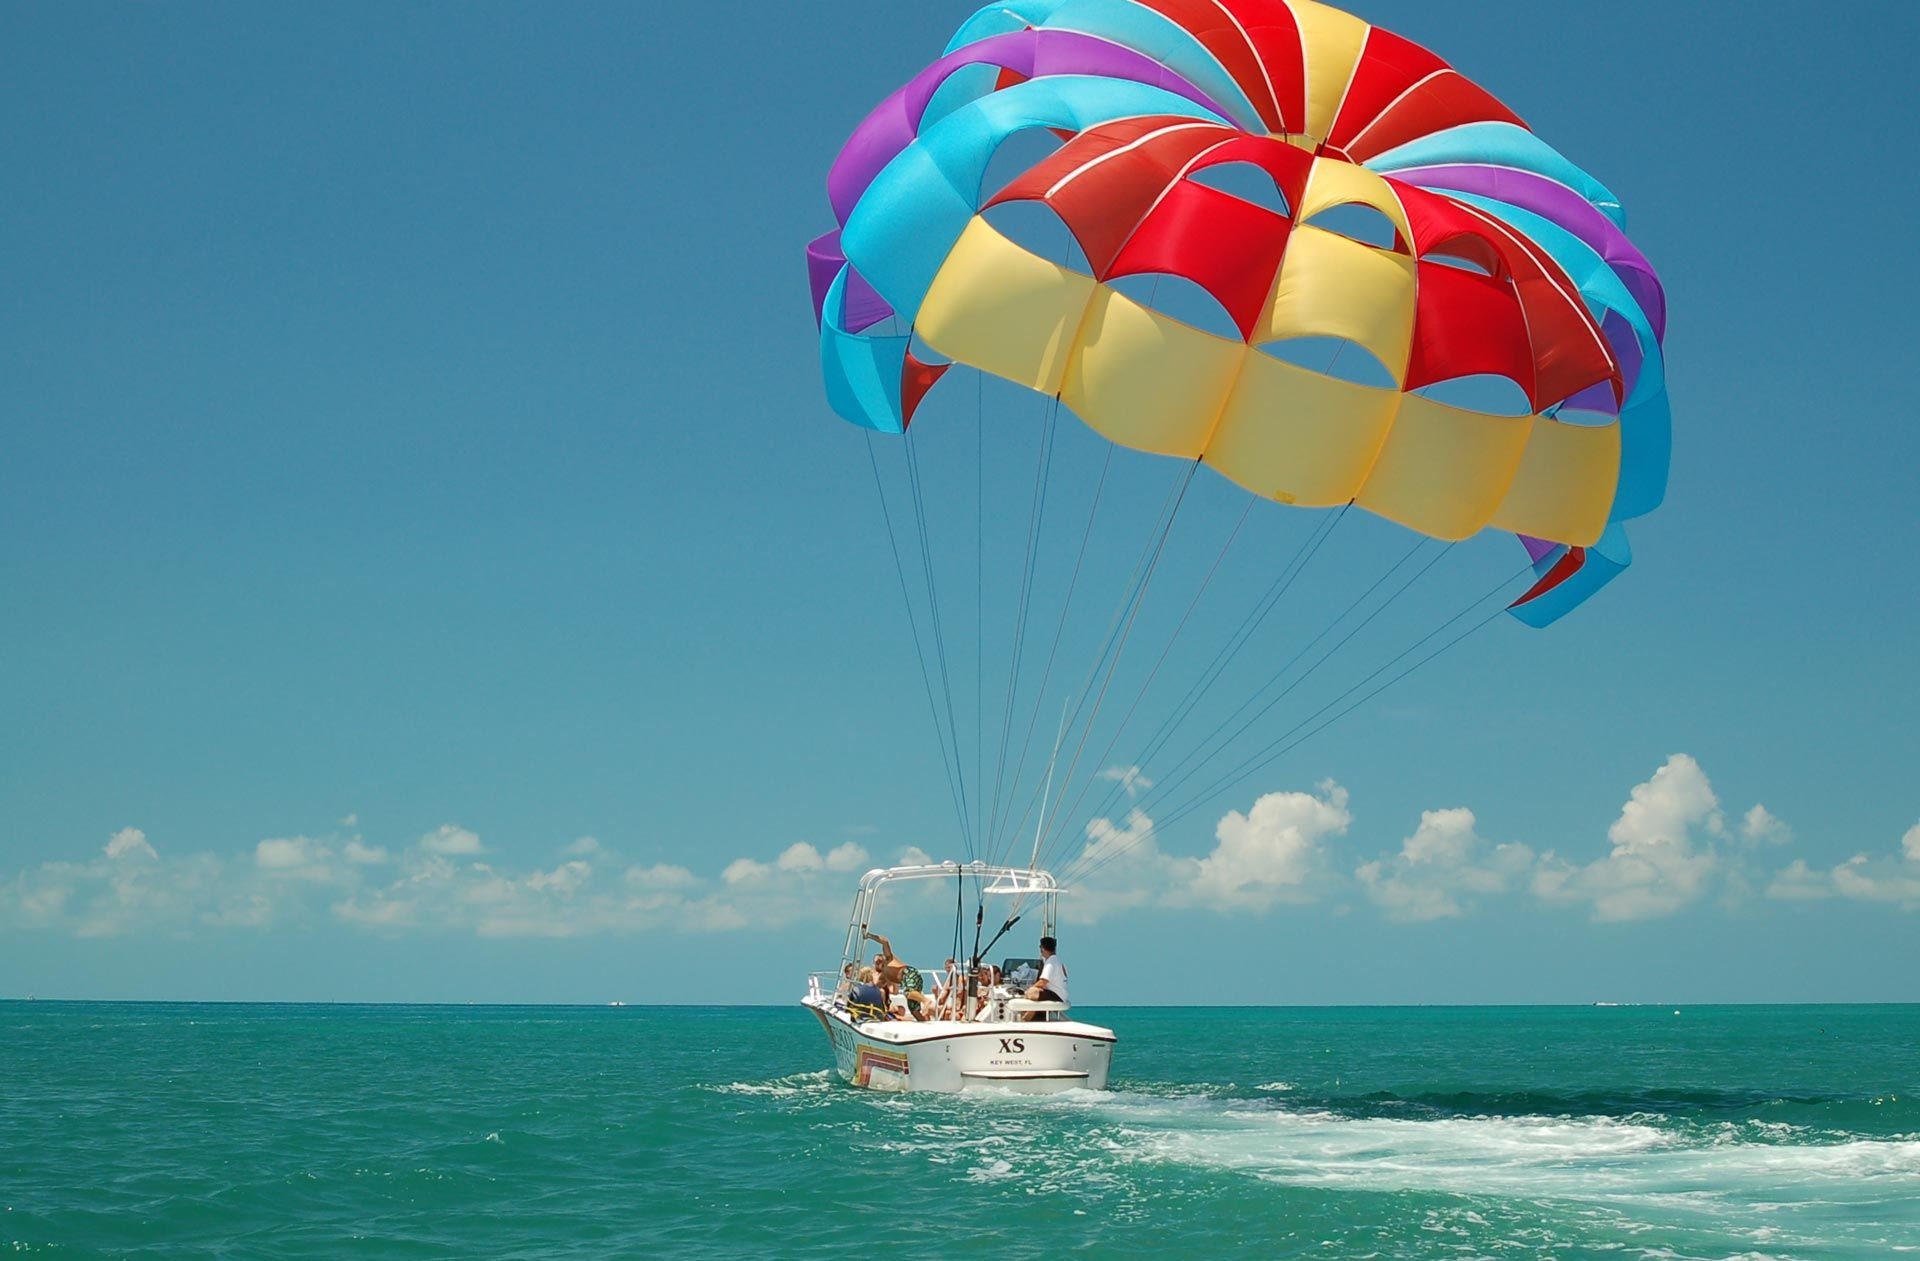 Parasailing: People sailing in the air, A recreational kiting activity, Towed behind a boat, Parachute, Key West. 1920x1270 HD Wallpaper.